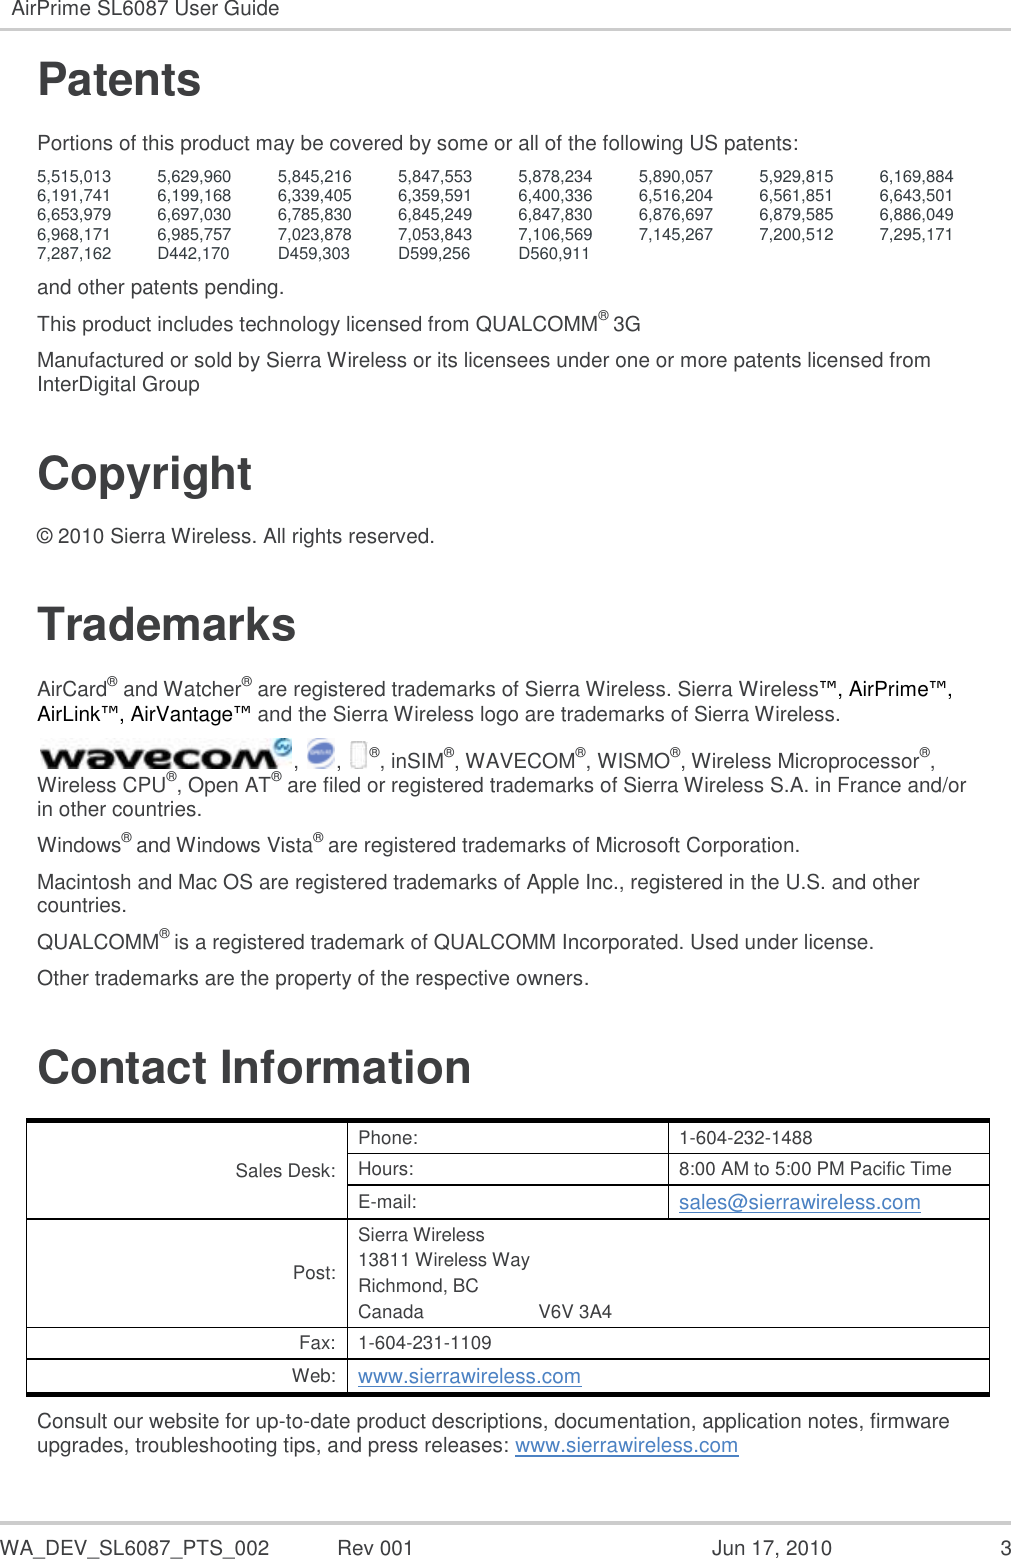  WA_DEV_SL6087_PTS_002  Rev 001  Jun 17, 2010  3 AirPrime SL6087 User Guide  Patents Portions of this product may be covered by some or all of the following US patents: 5,515,013 5,629,960 5,845,216 5,847,553 5,878,234 5,890,057 5,929,815 6,169,884 6,191,741 6,199,168 6,339,405 6,359,591 6,400,336 6,516,204 6,561,851 6,643,501 6,653,979 6,697,030 6,785,830 6,845,249 6,847,830 6,876,697 6,879,585 6,886,049 6,968,171 6,985,757 7,023,878 7,053,843 7,106,569 7,145,267 7,200,512 7,295,171 7,287,162 D442,170 D459,303 D599,256 D560,911    and other patents pending. This product includes technology licensed from QUALCOMM® 3G Manufactured or sold by Sierra Wireless or its licensees under one or more patents licensed from InterDigital Group Copyright © 2010 Sierra Wireless. All rights reserved. Trademarks AirCard® and Watcher® are registered trademarks of Sierra Wireless. Sierra Wireless™, AirPrime™, AirLink™, AirVantage™ and the Sierra Wireless logo are trademarks of Sierra Wireless. ,  ,  ®, inSIM®, WAVECOM®, WISMO®, Wireless Microprocessor®, Wireless CPU®, Open AT® are filed or registered trademarks of Sierra Wireless S.A. in France and/or in other countries. Windows® and Windows Vista® are registered trademarks of Microsoft Corporation. Macintosh and Mac OS are registered trademarks of Apple Inc., registered in the U.S. and other countries. QUALCOMM® is a registered trademark of QUALCOMM Incorporated. Used under license. Other trademarks are the property of the respective owners. Contact Information Sales Desk: Phone: 1-604-232-1488 Hours: 8:00 AM to 5:00 PM Pacific Time E-mail: sales@sierrawireless.com Post: Sierra Wireless 13811 Wireless Way Richmond, BC Canada                      V6V 3A4 Fax: 1-604-231-1109 Web: www.sierrawireless.com Consult our website for up-to-date product descriptions, documentation, application notes, firmware upgrades, troubleshooting tips, and press releases: www.sierrawireless.com 